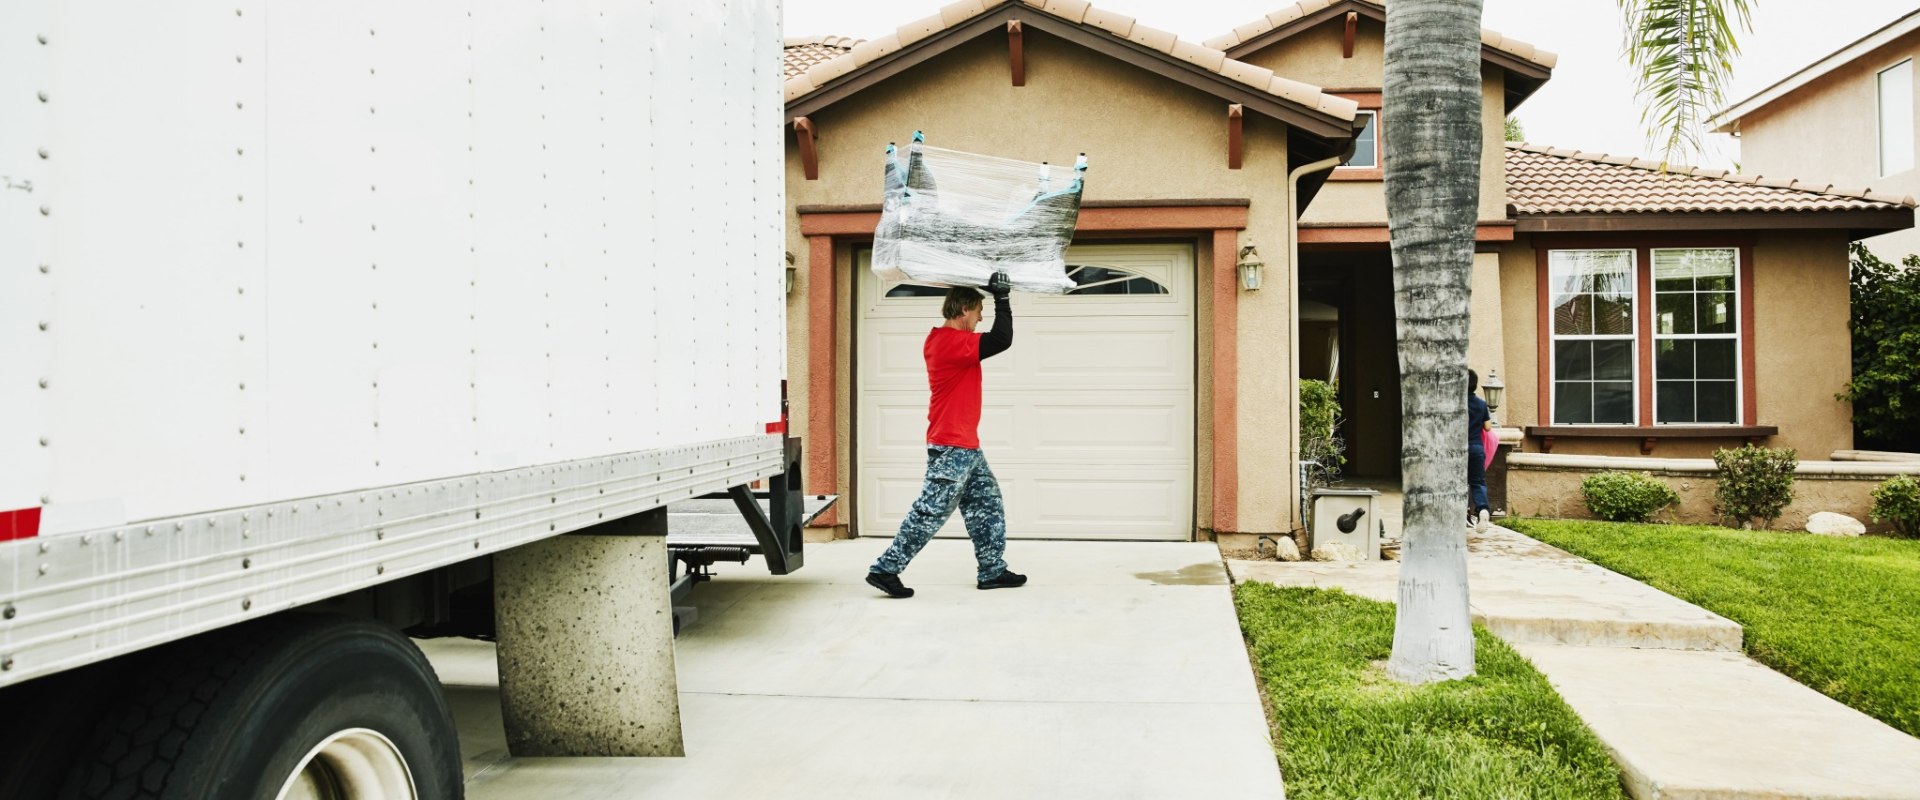 Price Estimation for Long Distance Moving in Las Vegas